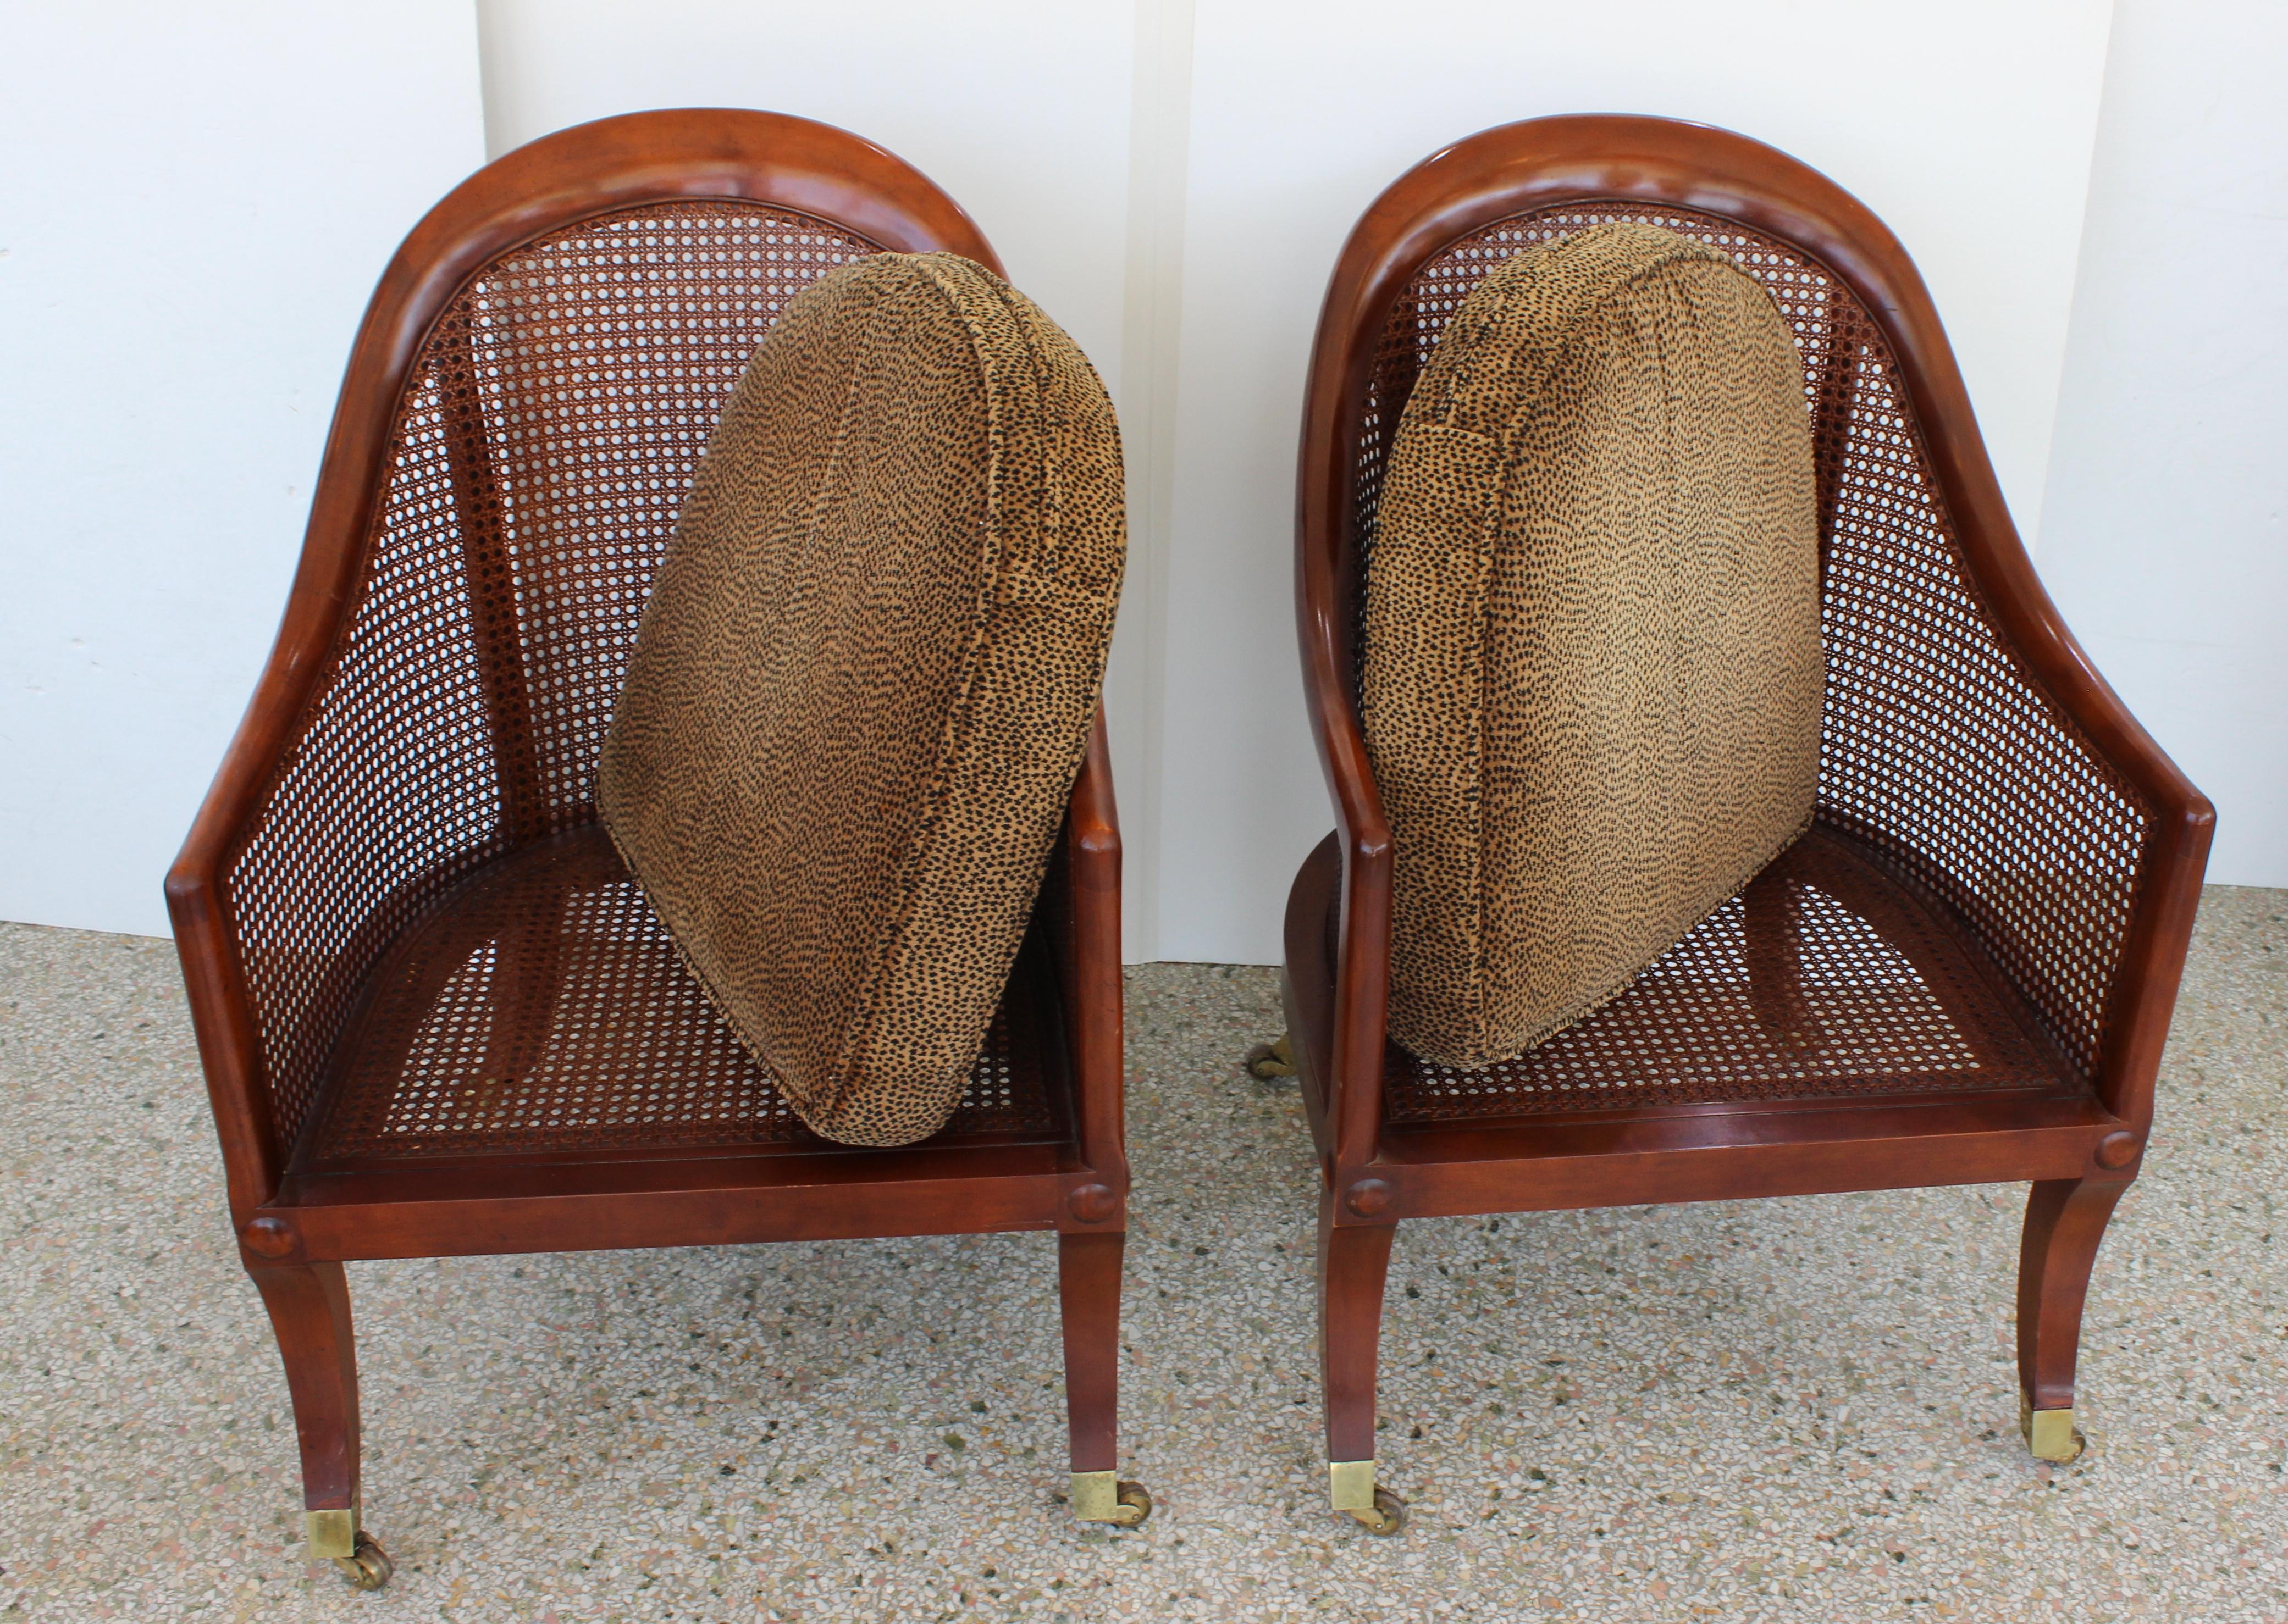 20th Century Pair of English Regency Style Chairs by Baker Furniture